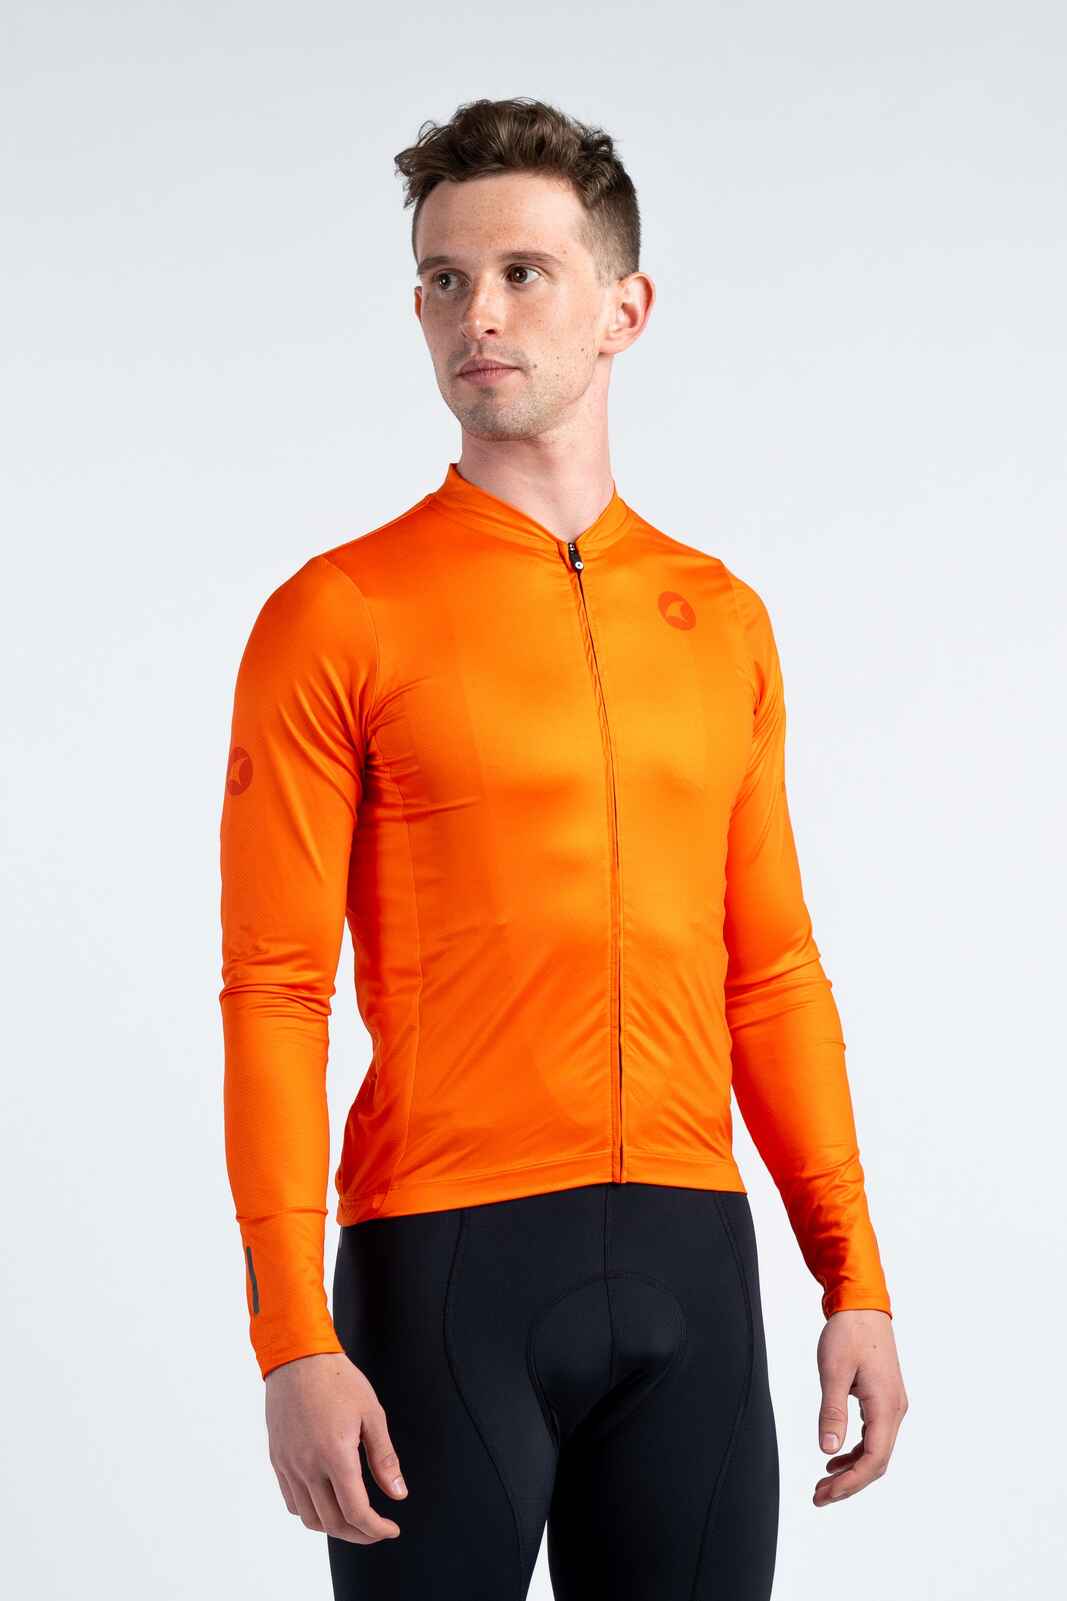 Men's Red/Orange Long Sleeve Cycling Jersey - Ascent Front View